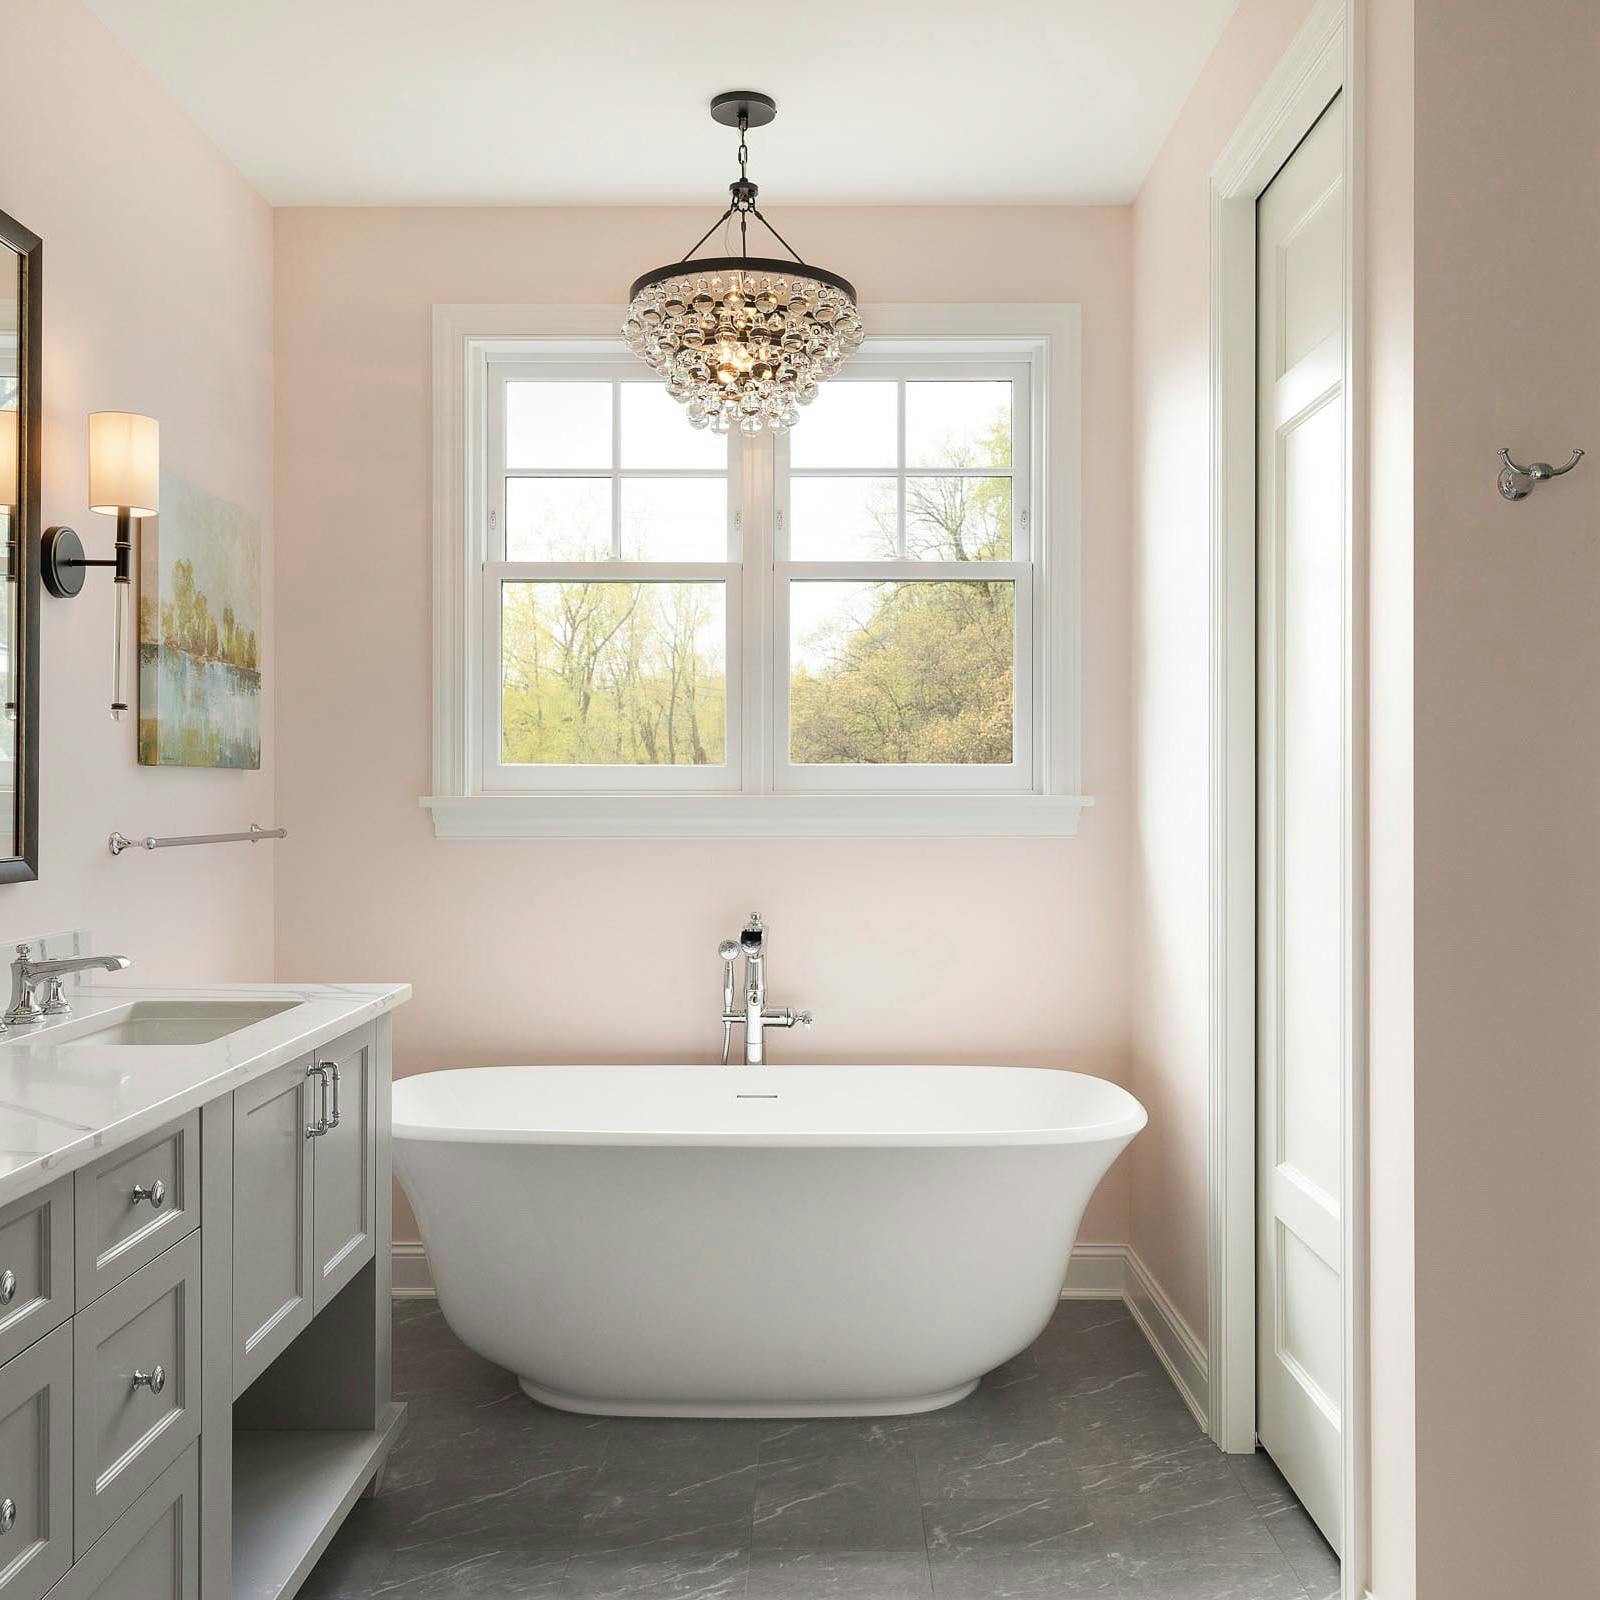 pink and grey bathroom, standing tub, chandelier hanging above tub 